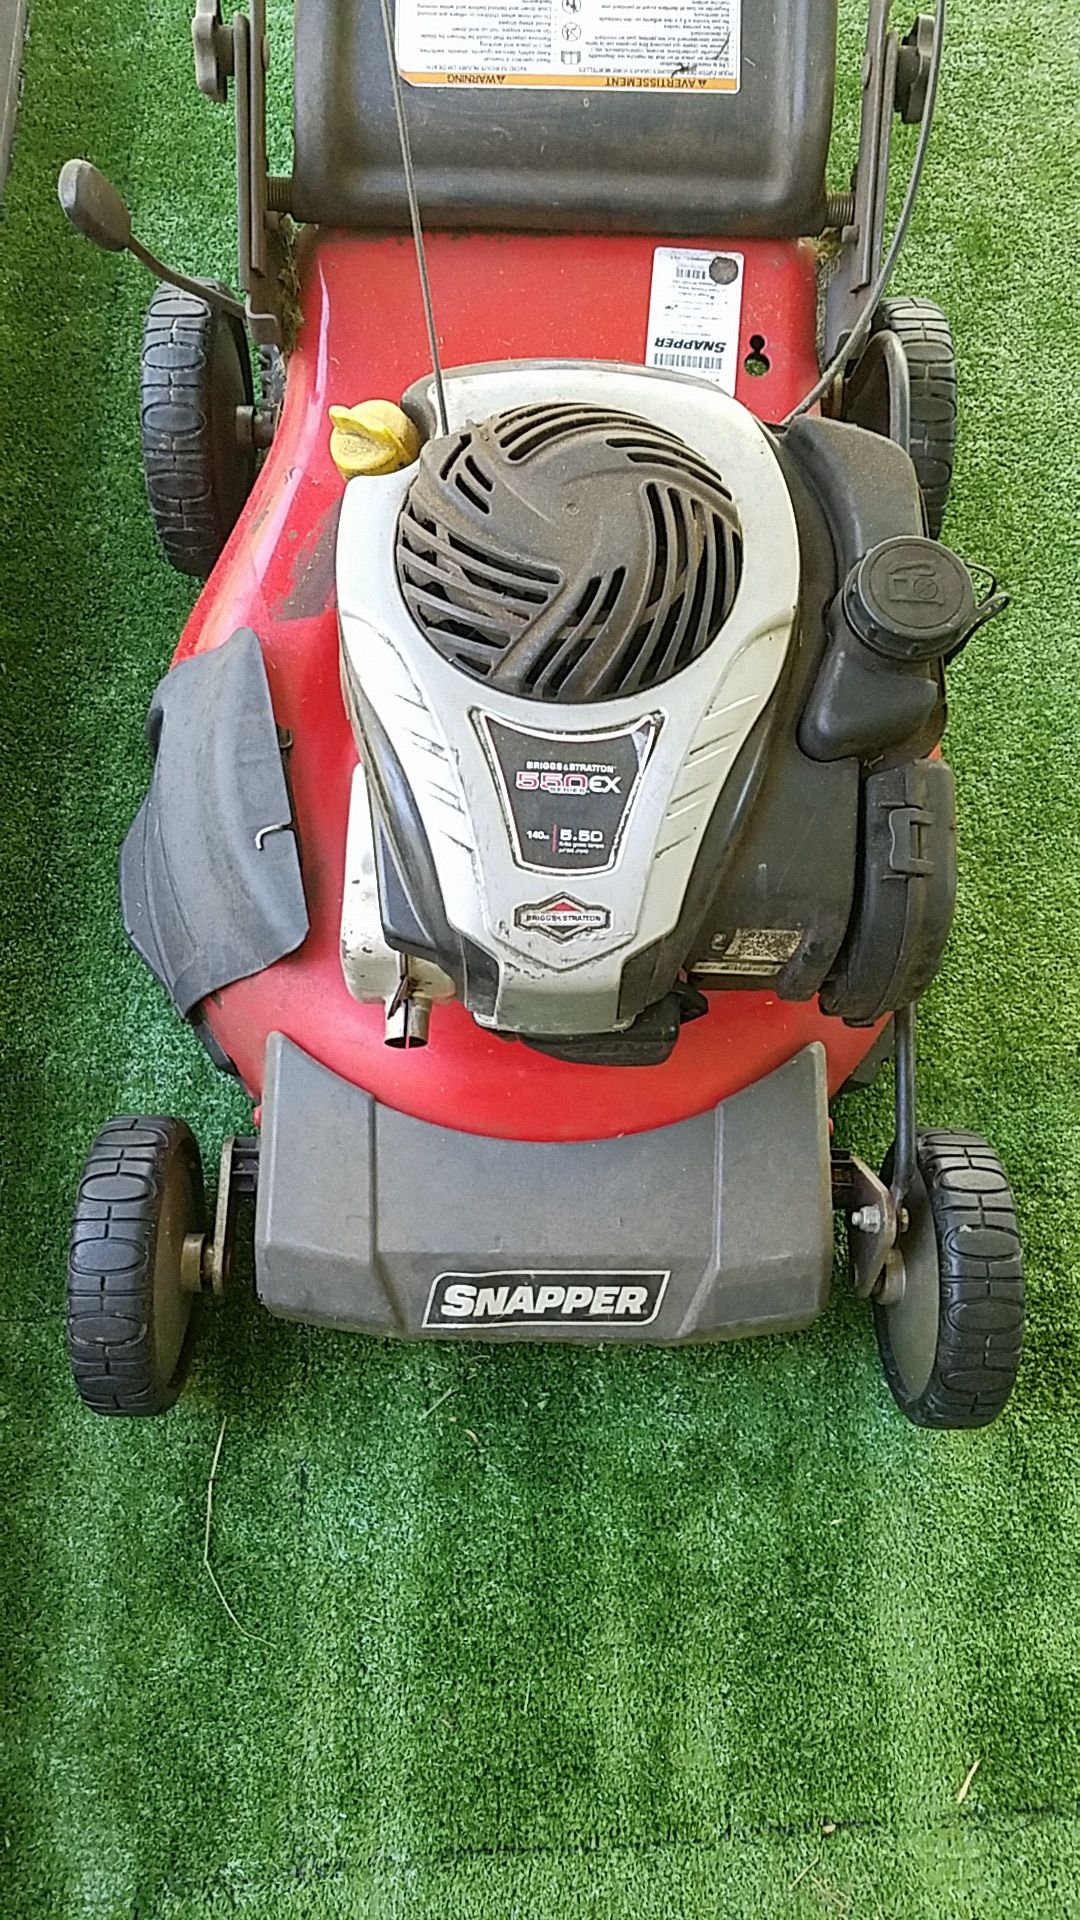 Snapper lawnmower with bagger